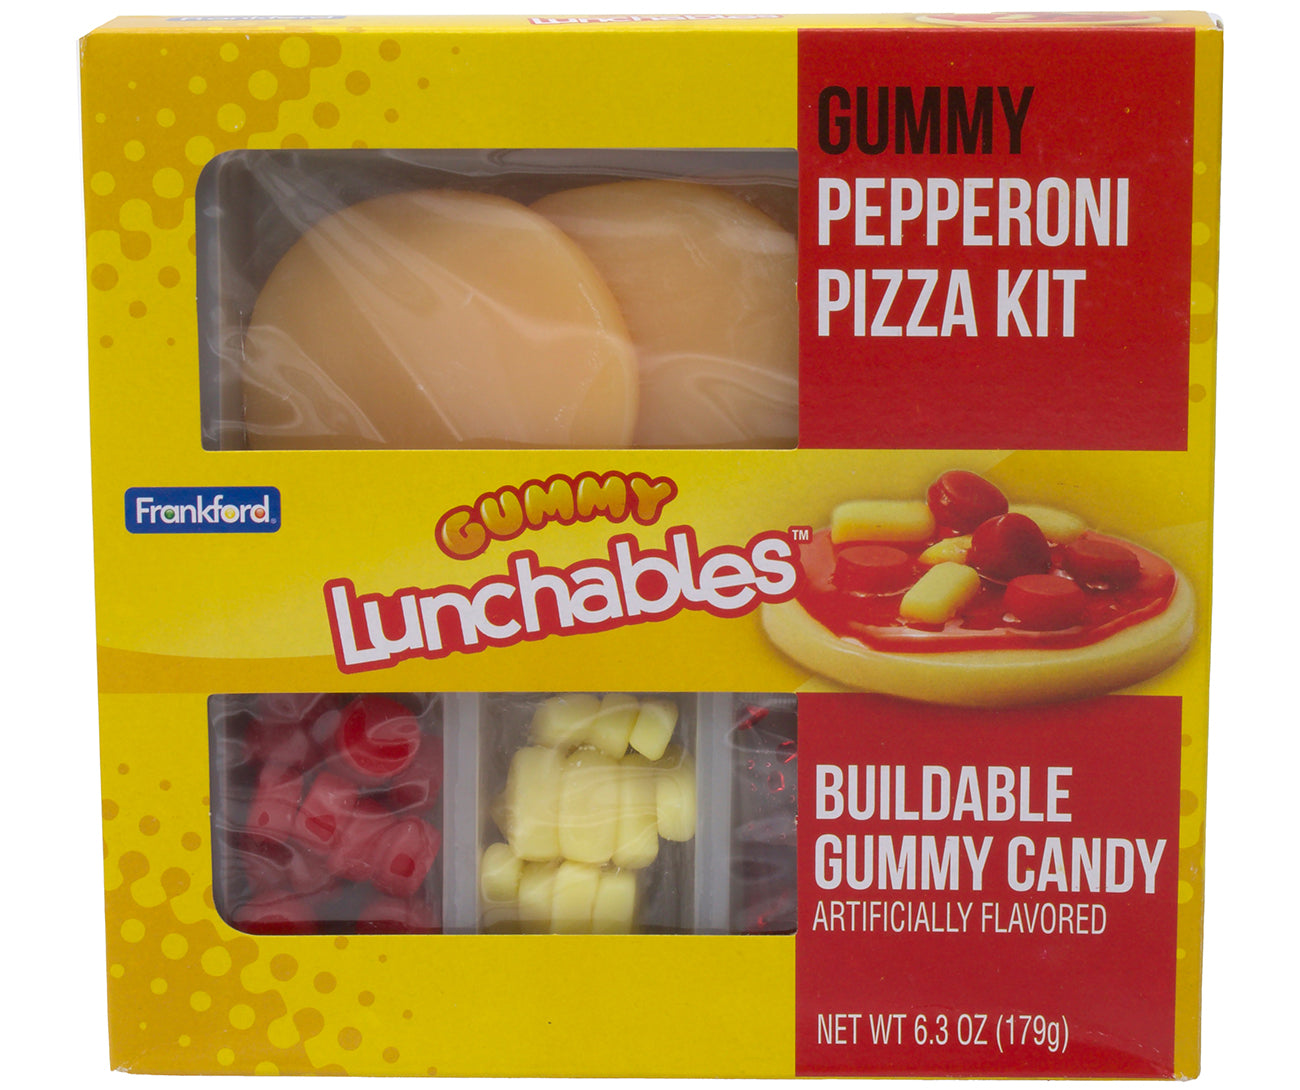 yellow box of gummy lunchables pepperoni pizza kit on white background